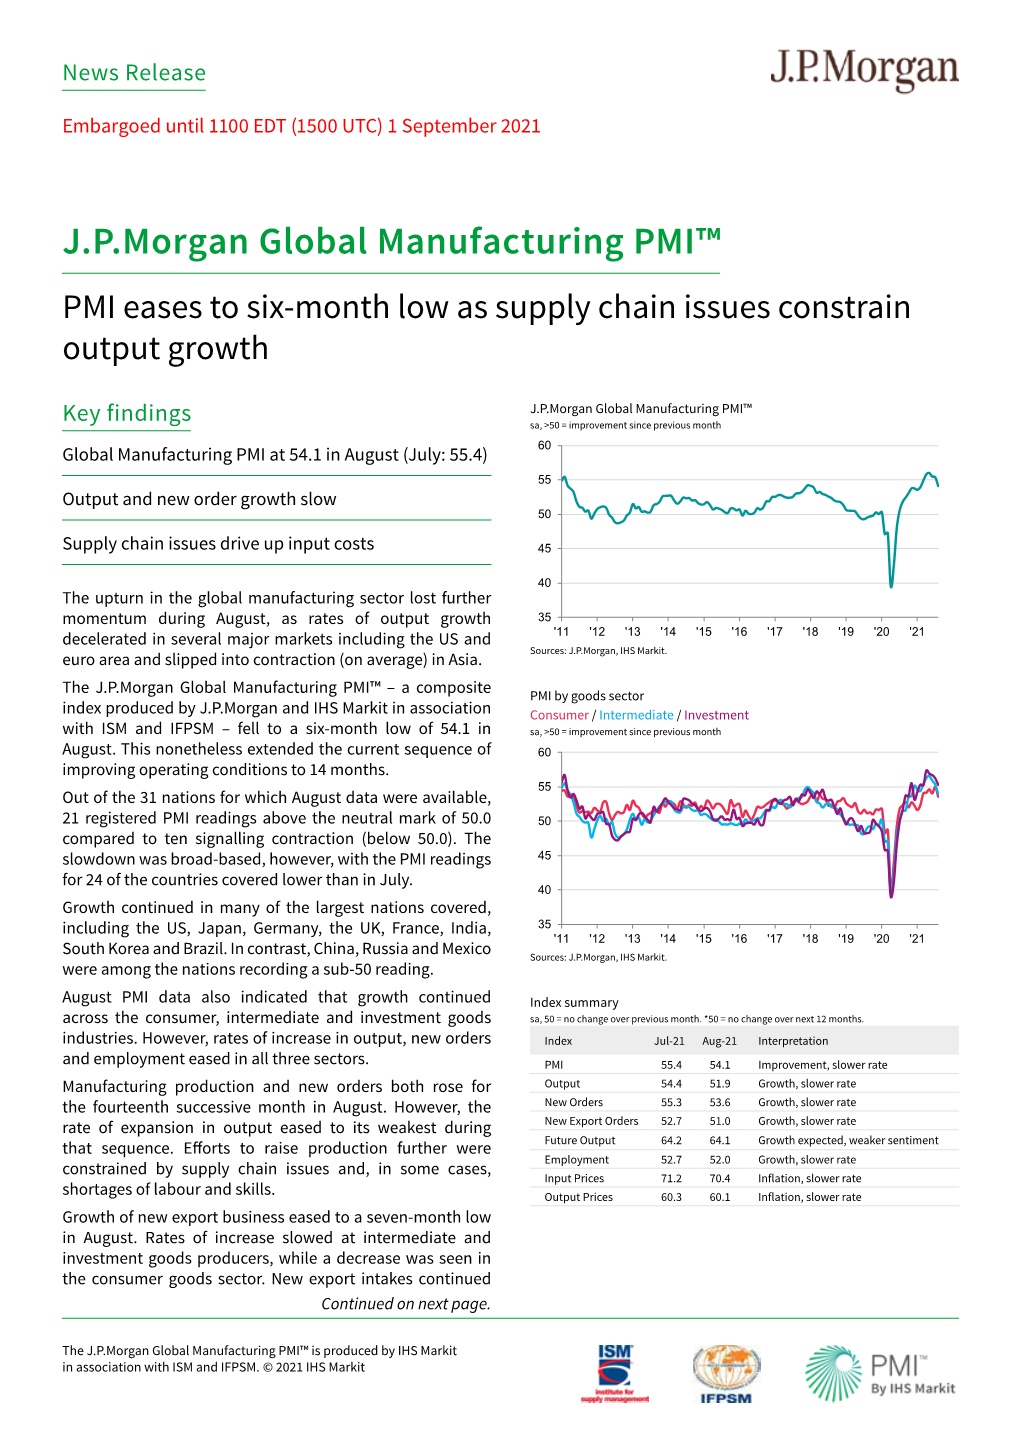 J.P.Morgan Global Manufacturing PMI™ PMI Eases to Six-Month Low As Supply Chain Issues Constrain Output Growth